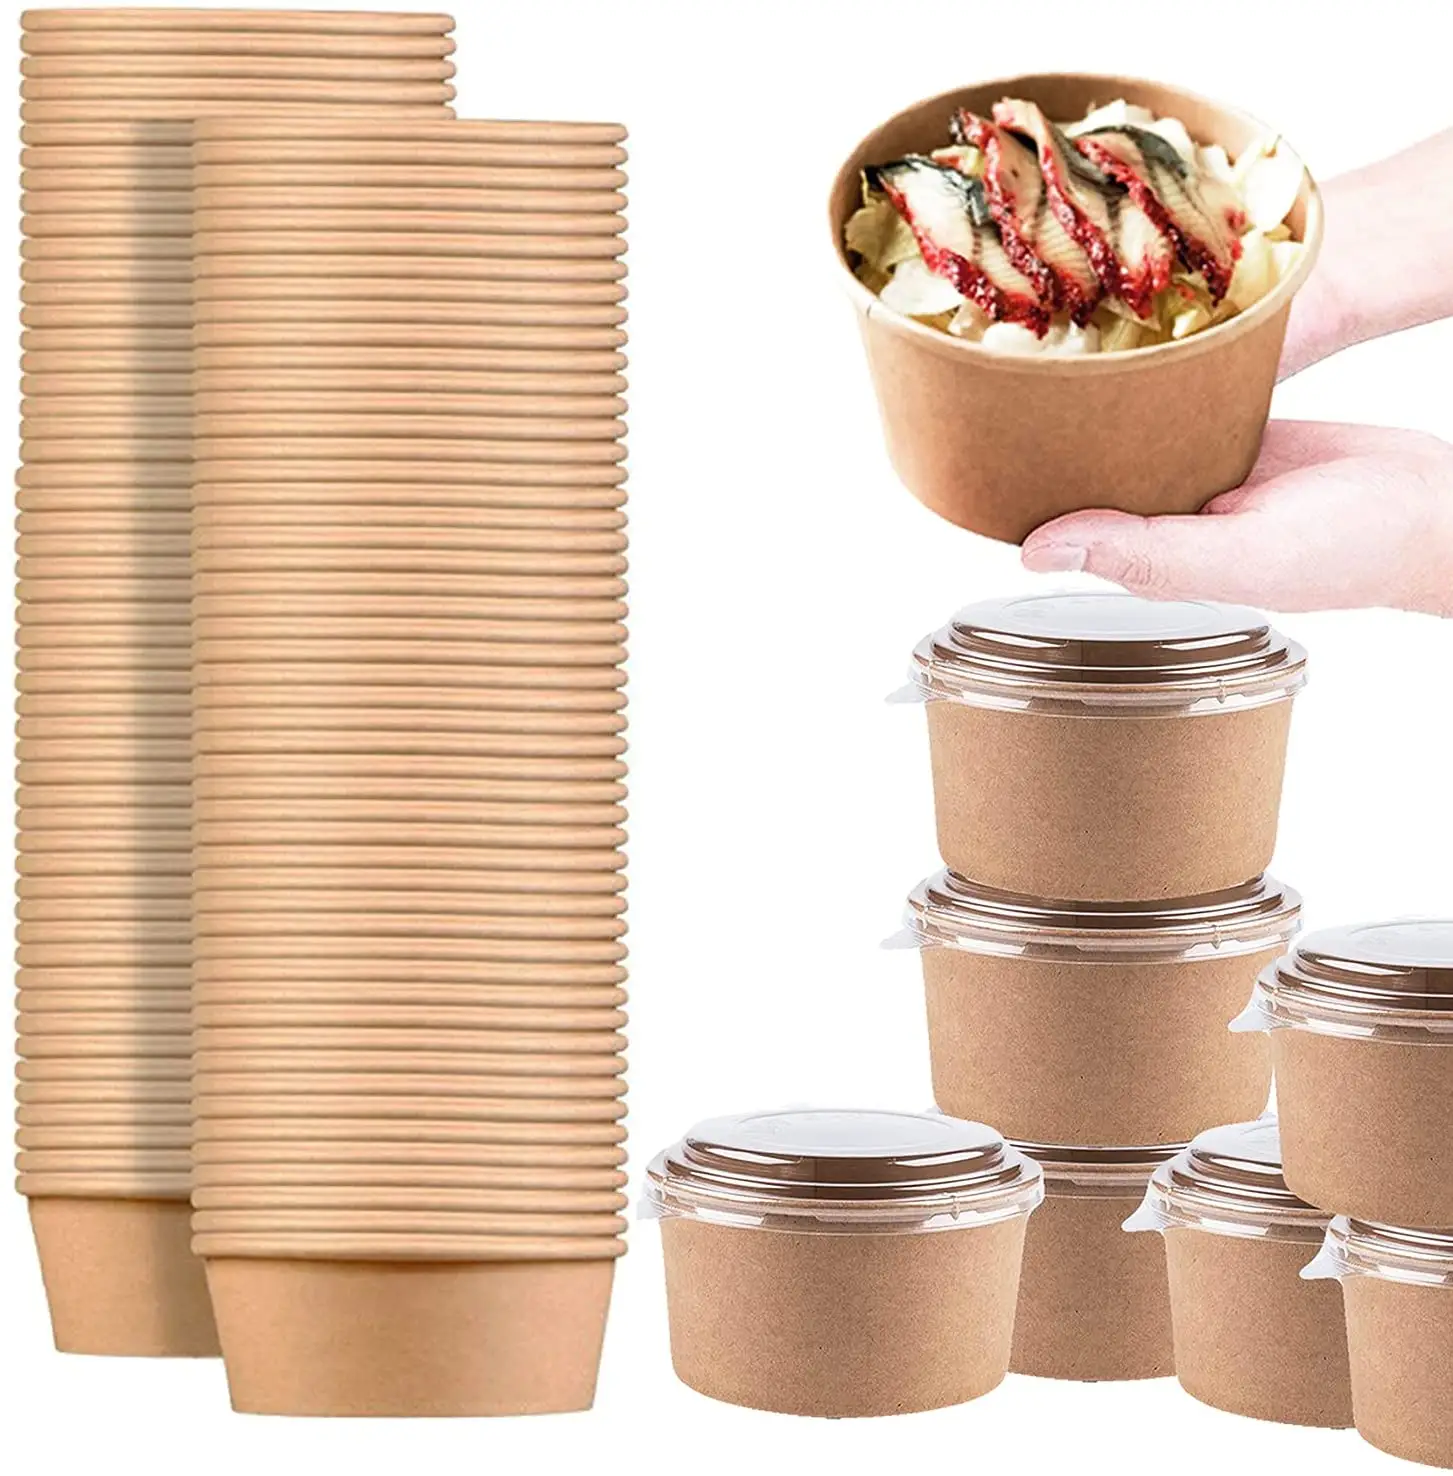 ODM/OEM Emballages Alimentaires Round Brown Biodegradable Eco-Friendly Take Away Salad Fast Kraft Paper Packaging Bowl